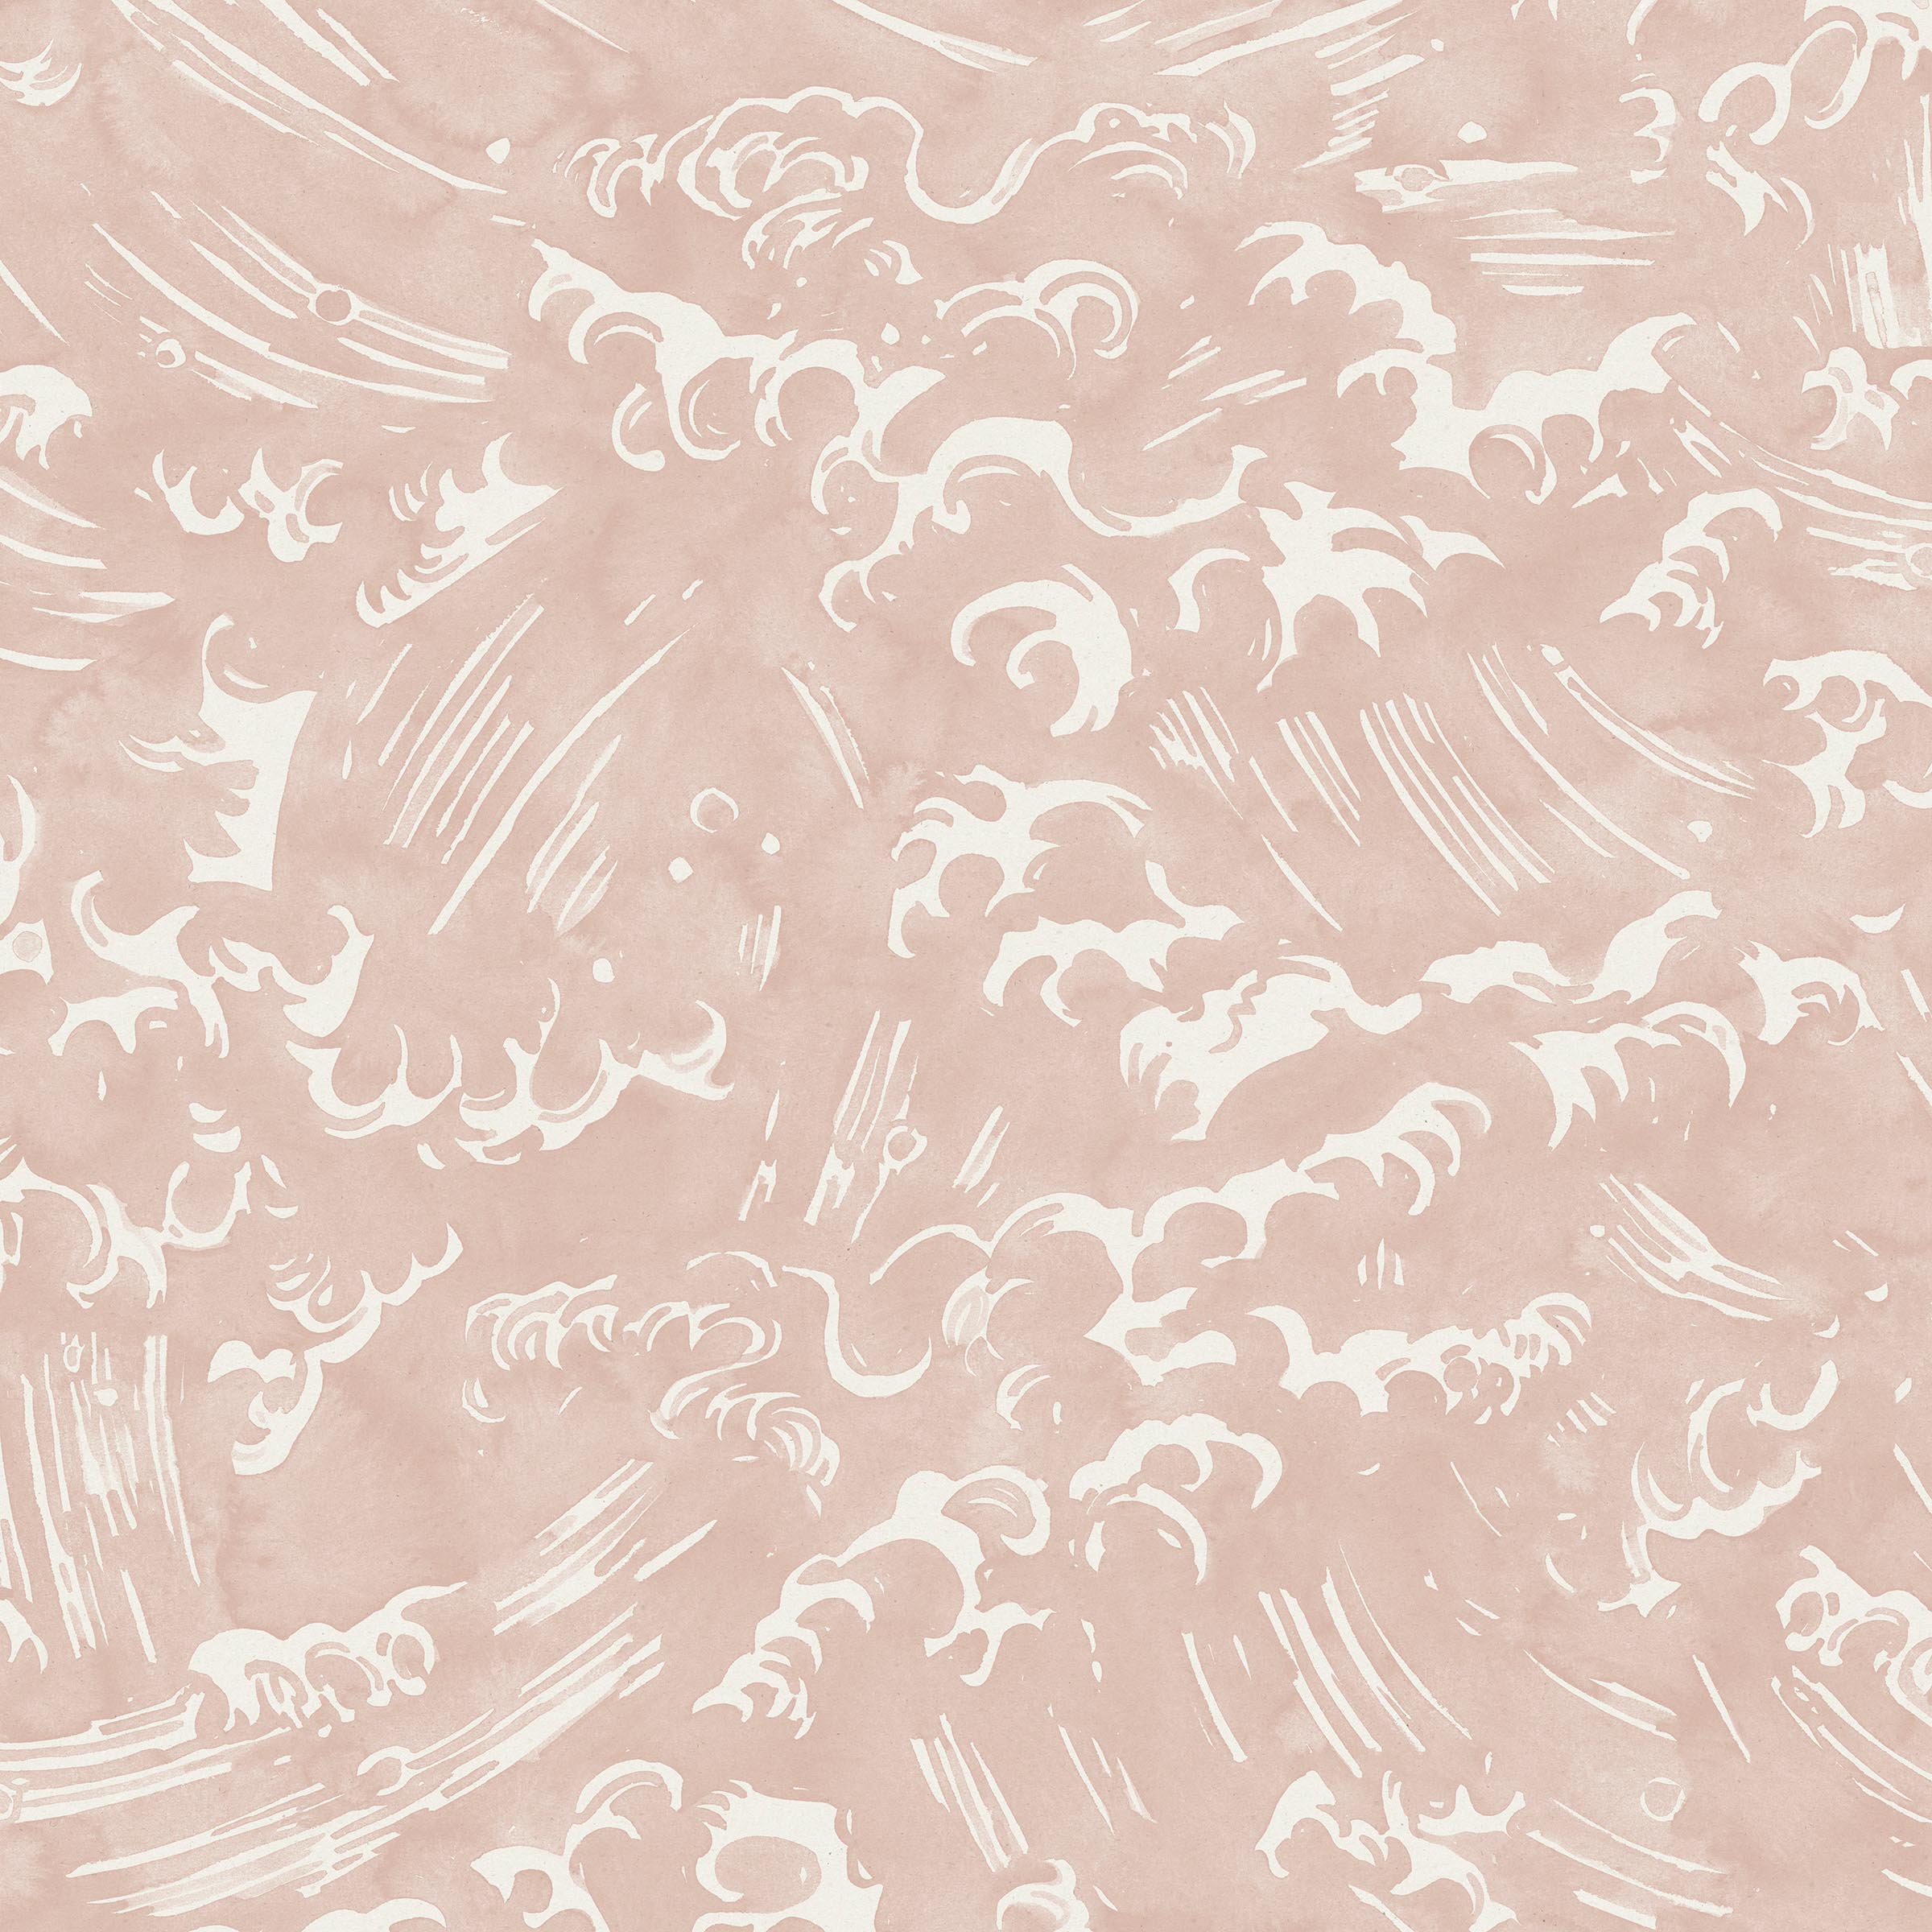 Detail of wallpaper in a playful wave print in white on a light pink watercolor field.